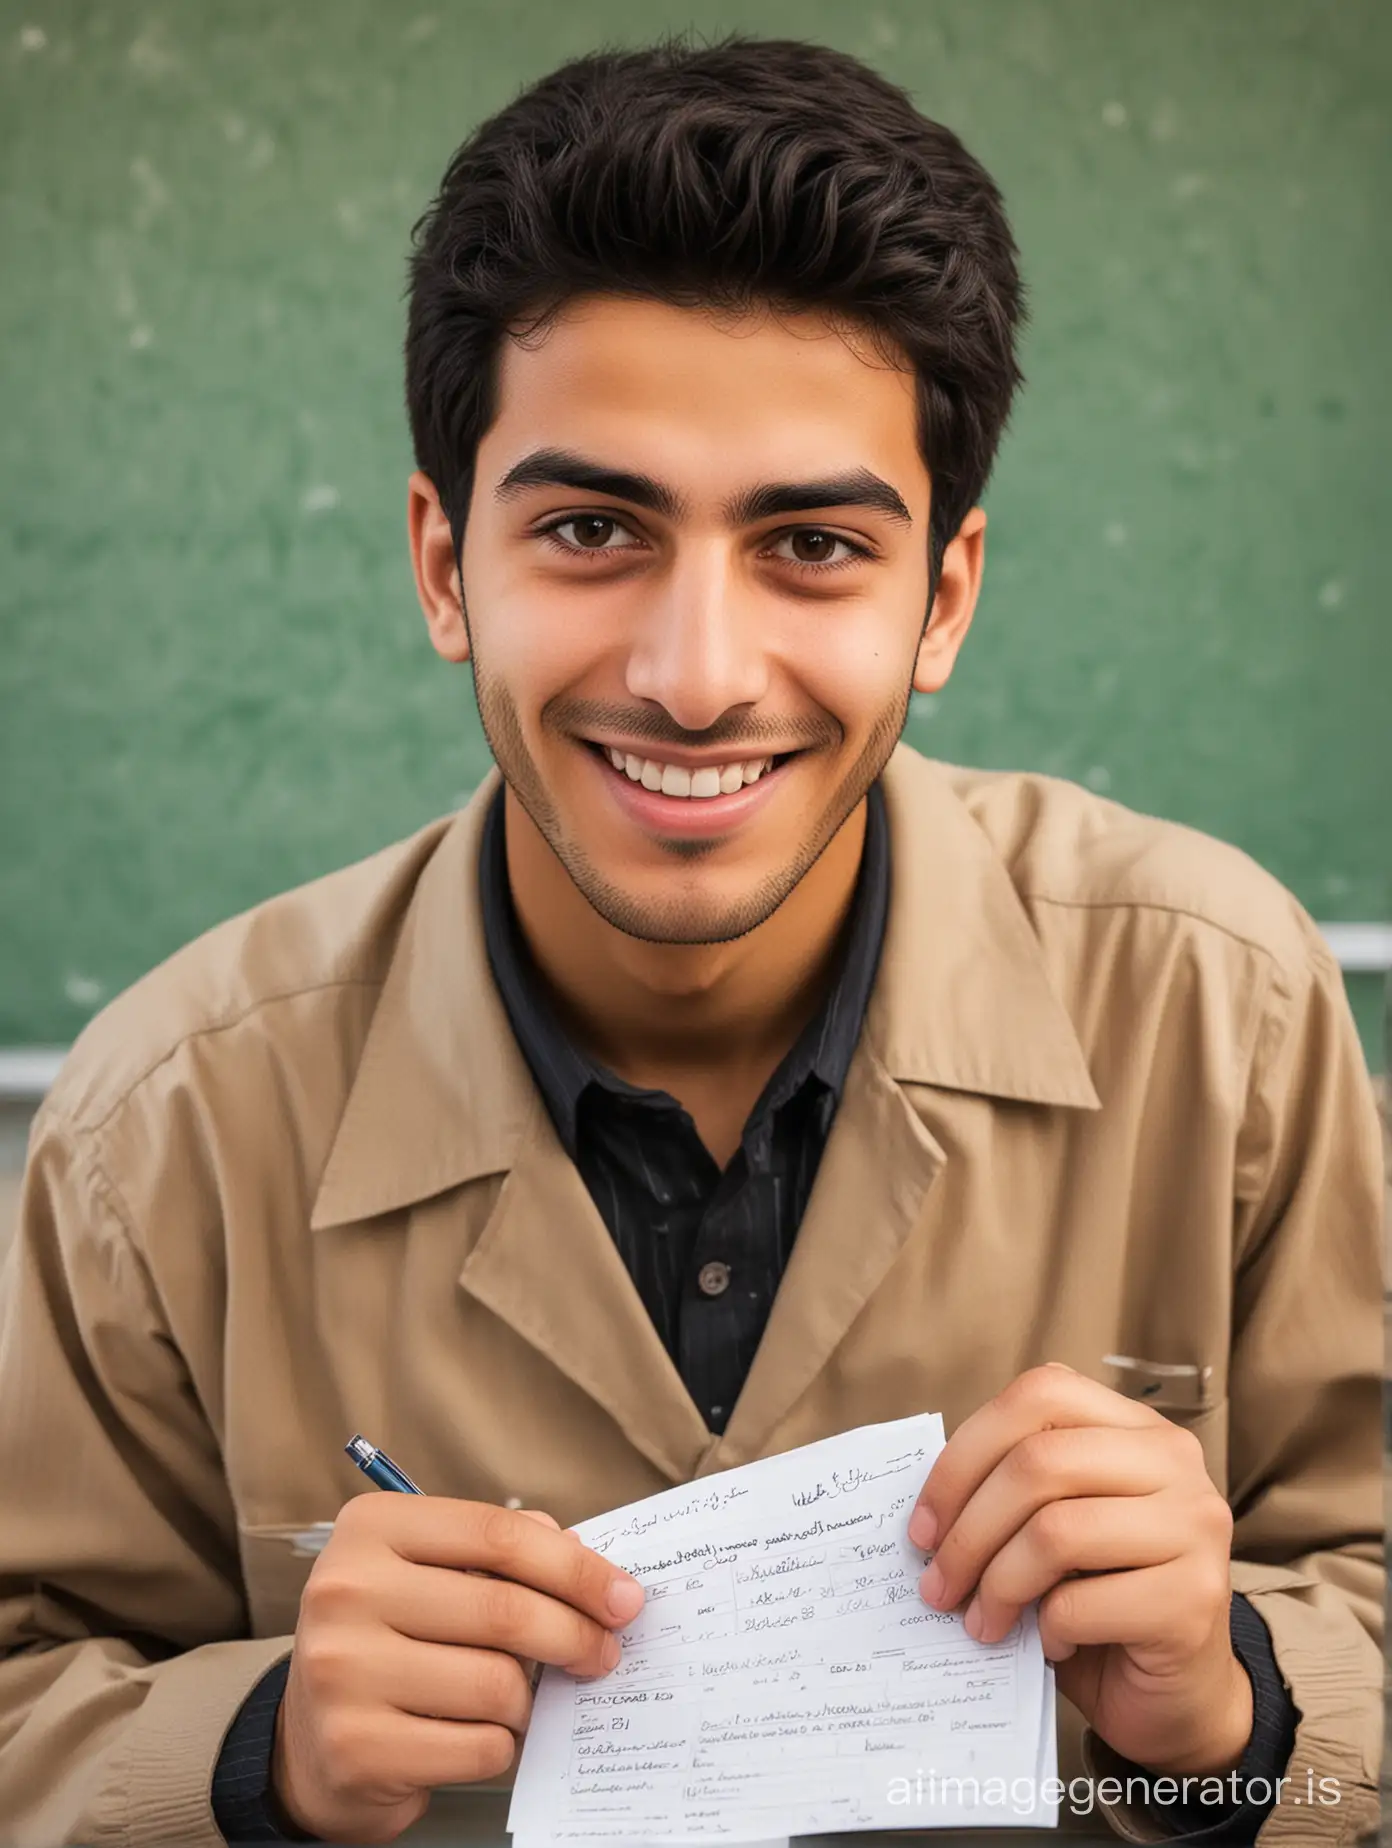 An Iranian student young man who looks at his report card with mischief and happiness